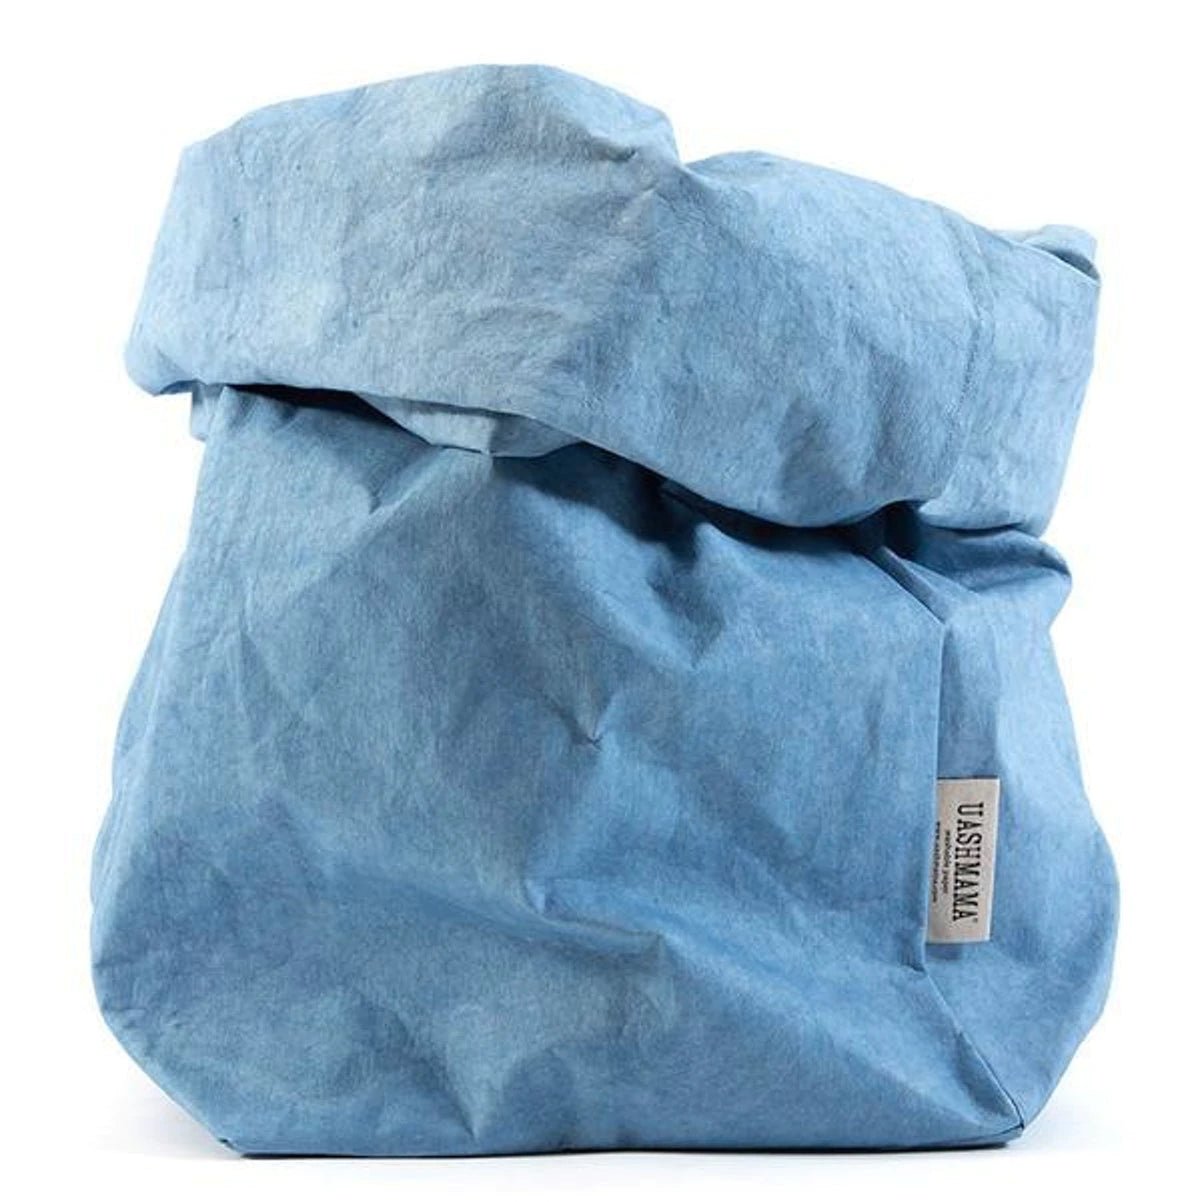 A washable paper bag is shown. The bag is rolled down at the top and features a UASHMAMA logo label on the bottom left corner. The bag pictured is the extra large size in light blue.